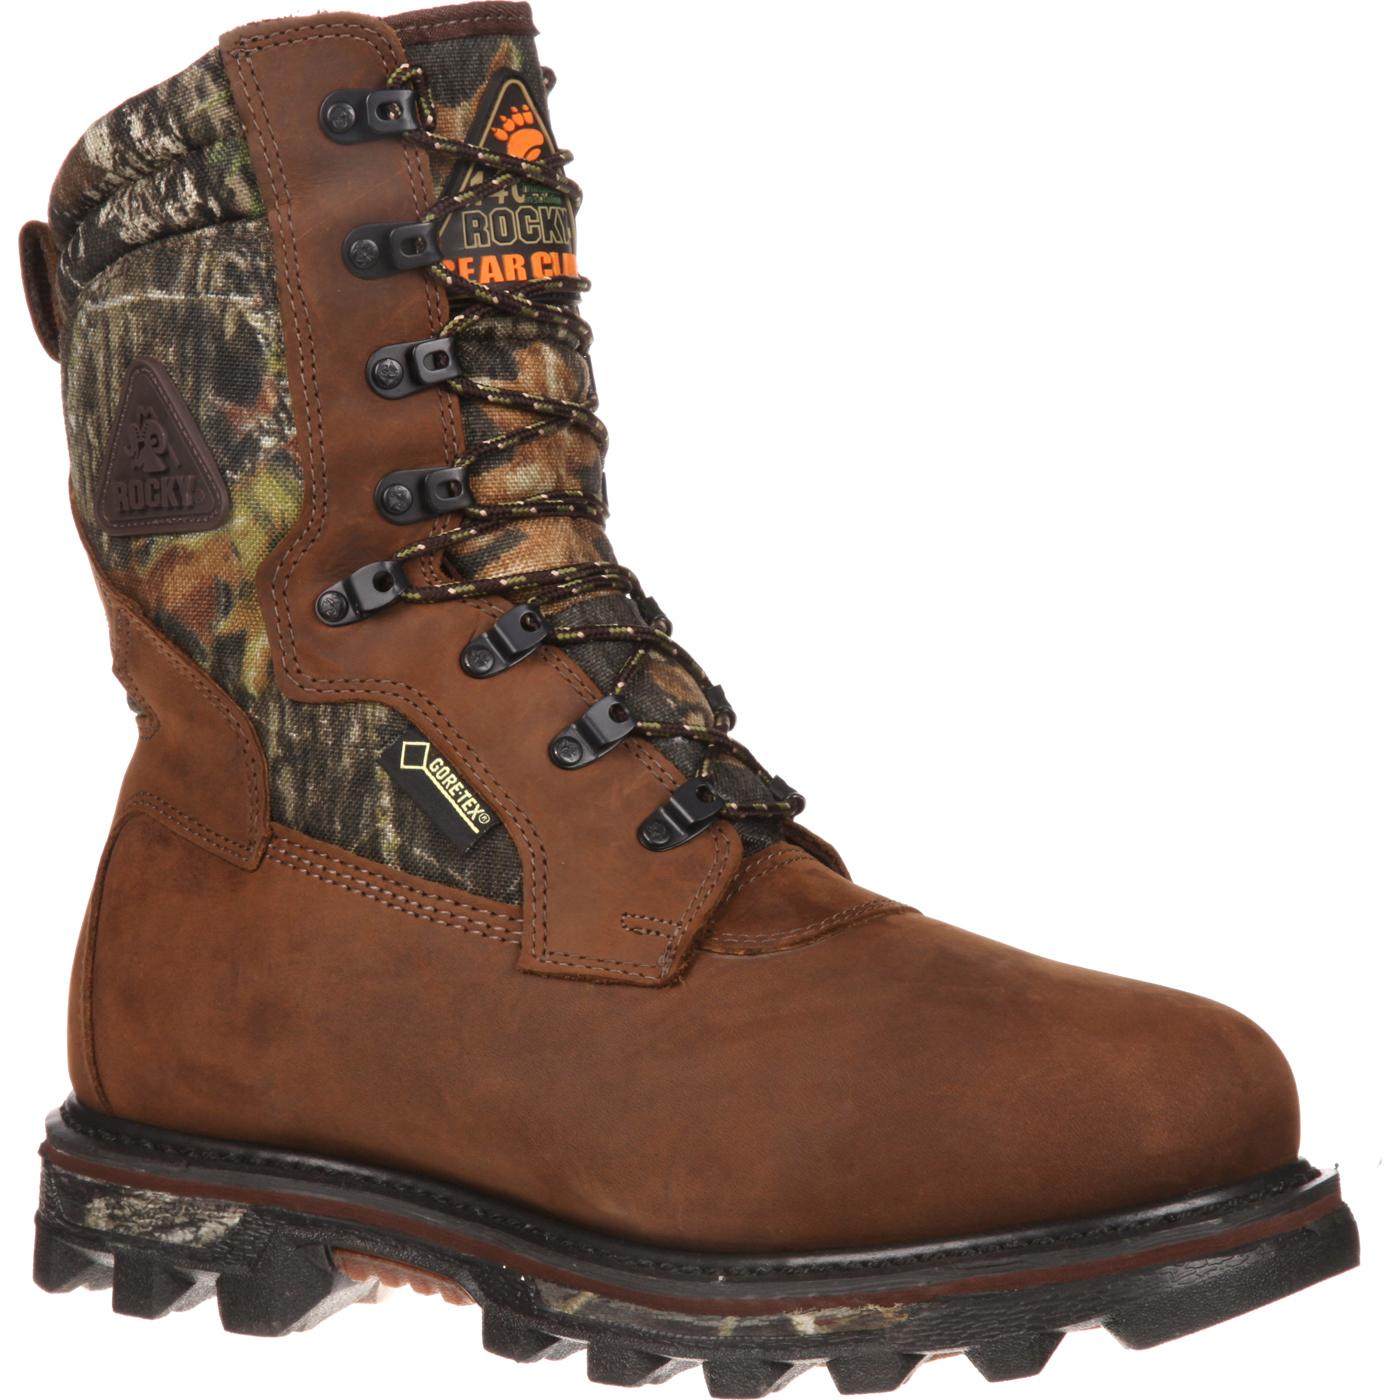 Rocky Arctic - GORE-TEX Waterproof Insulated Camo Boots